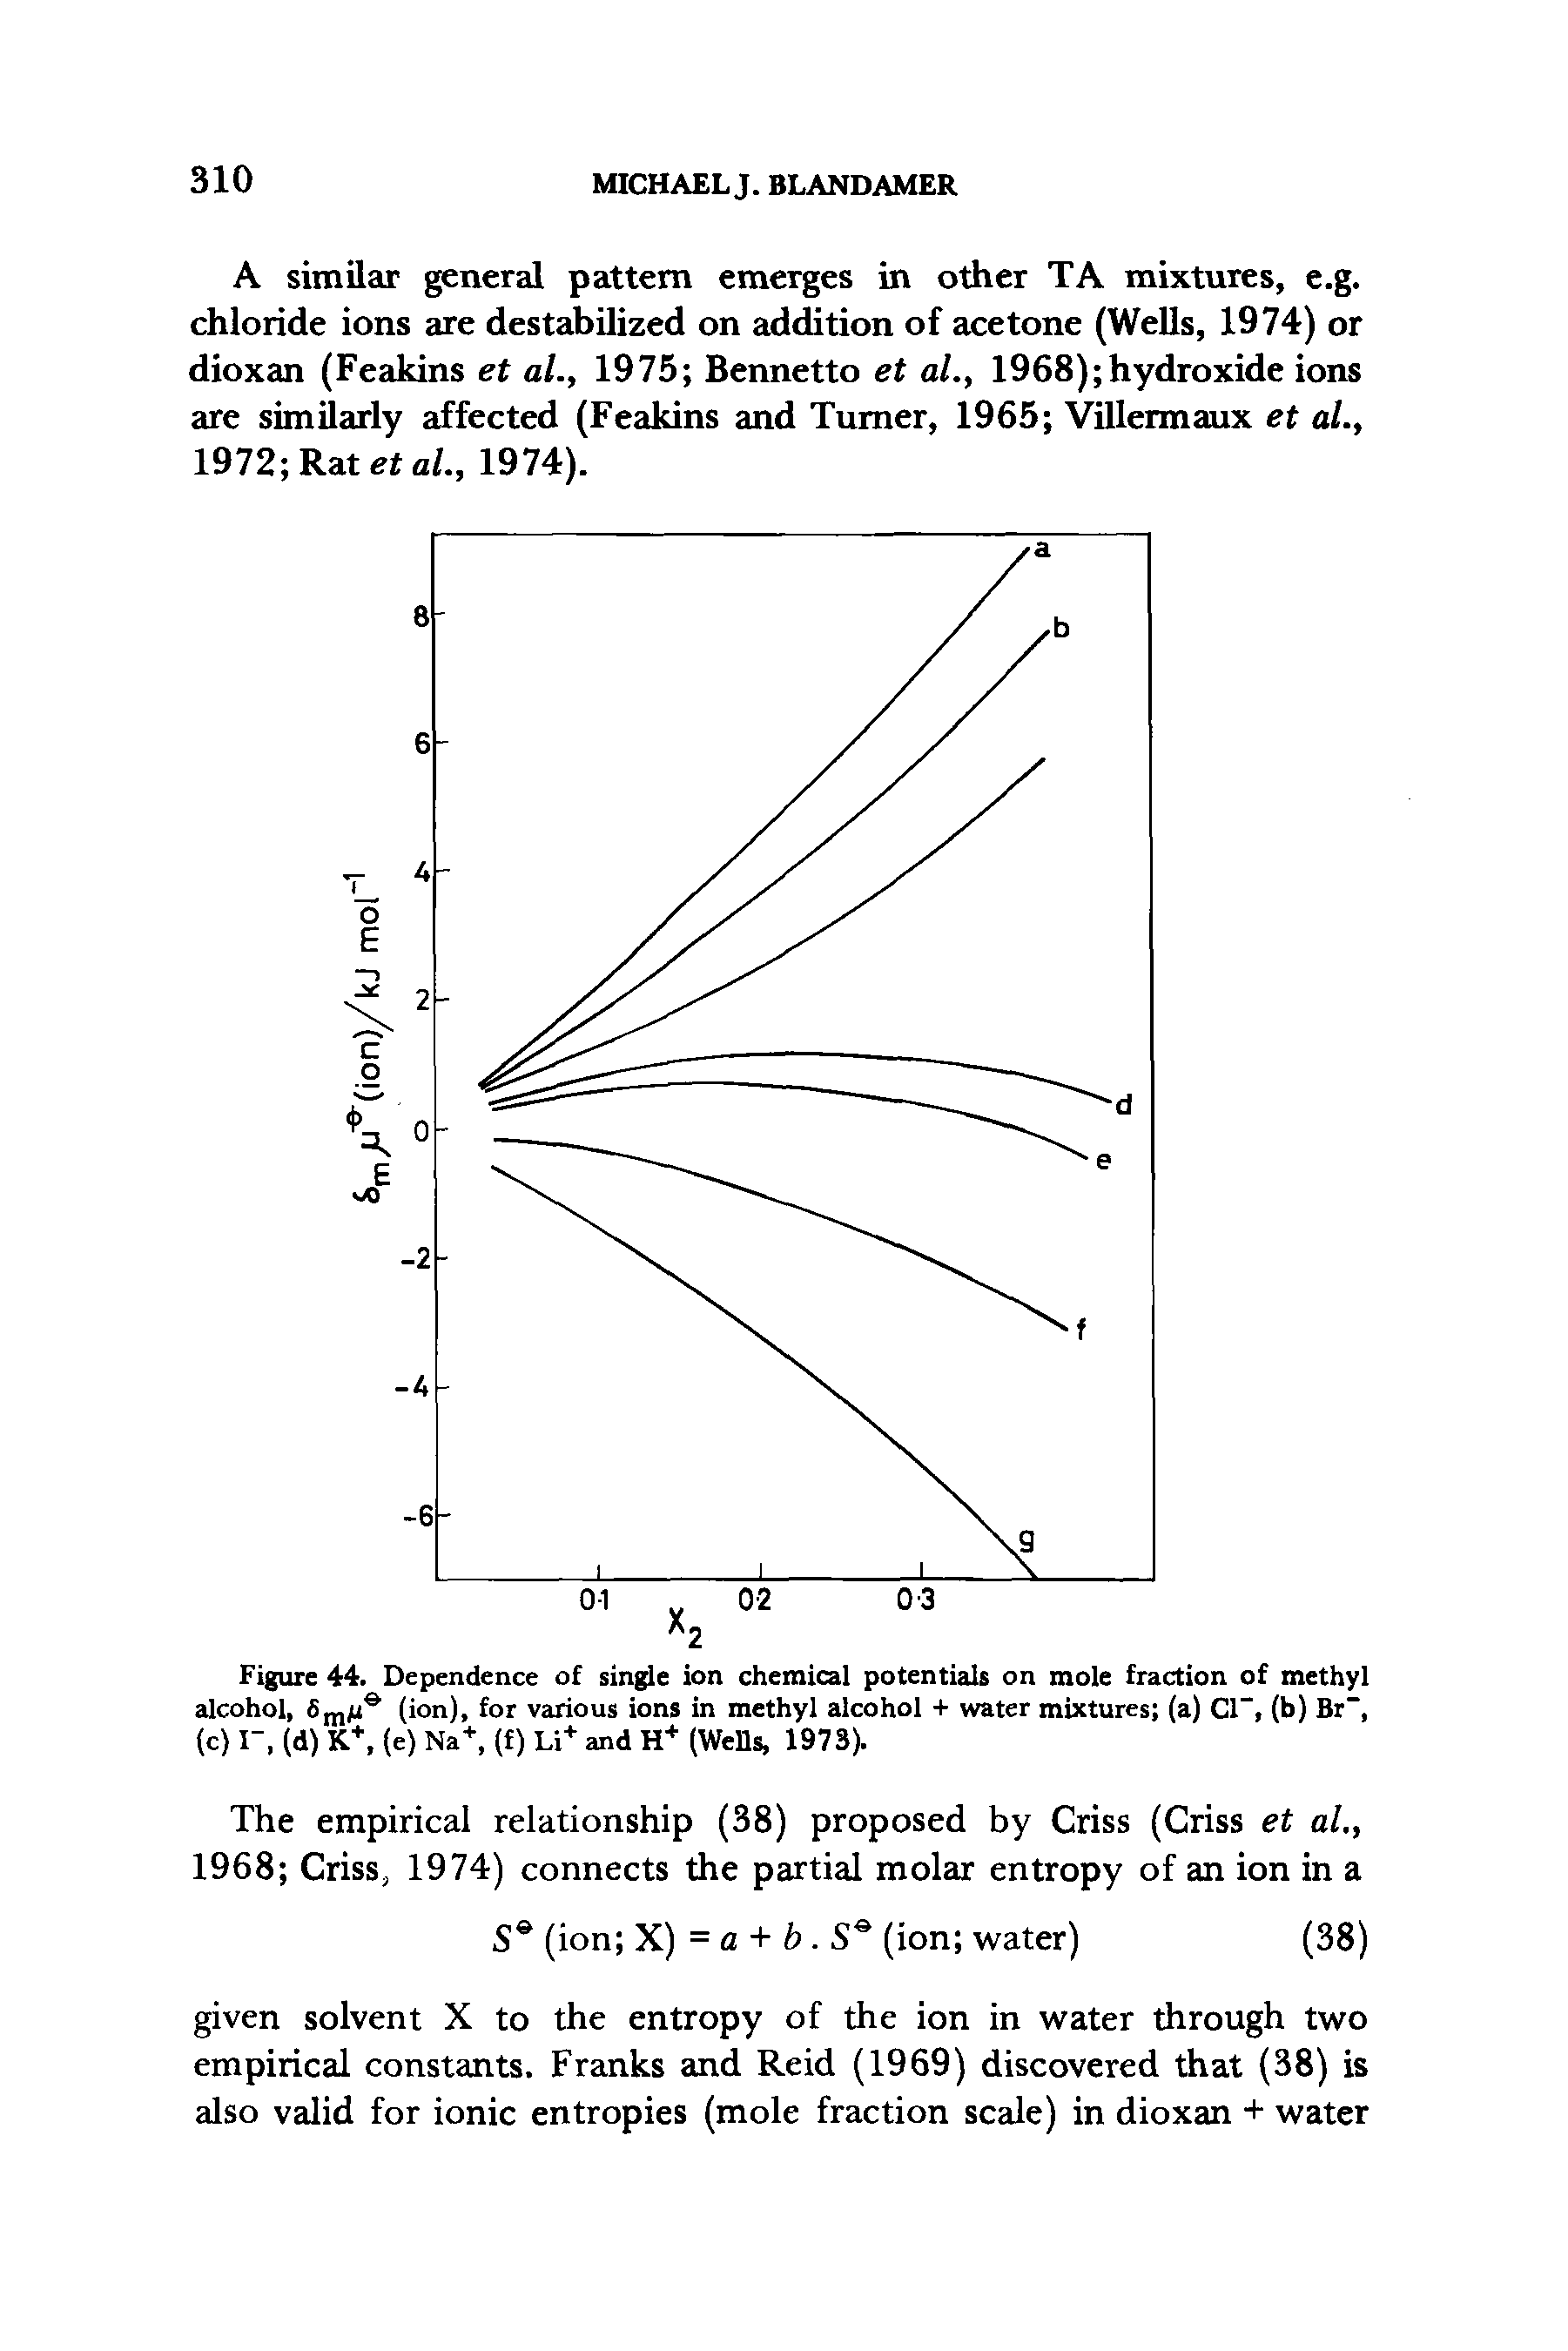 Figure 44. Dependence of single ion chemical potentials on mole fraction of methyl alcohol, 6m(i° (ion), for various ions in methyl alcohol + water mixtures (a) Cl-, (b) Br-, (c) I", (d) K+, (e) Na+, (f) Li+ and H+ (Wells, 1973).